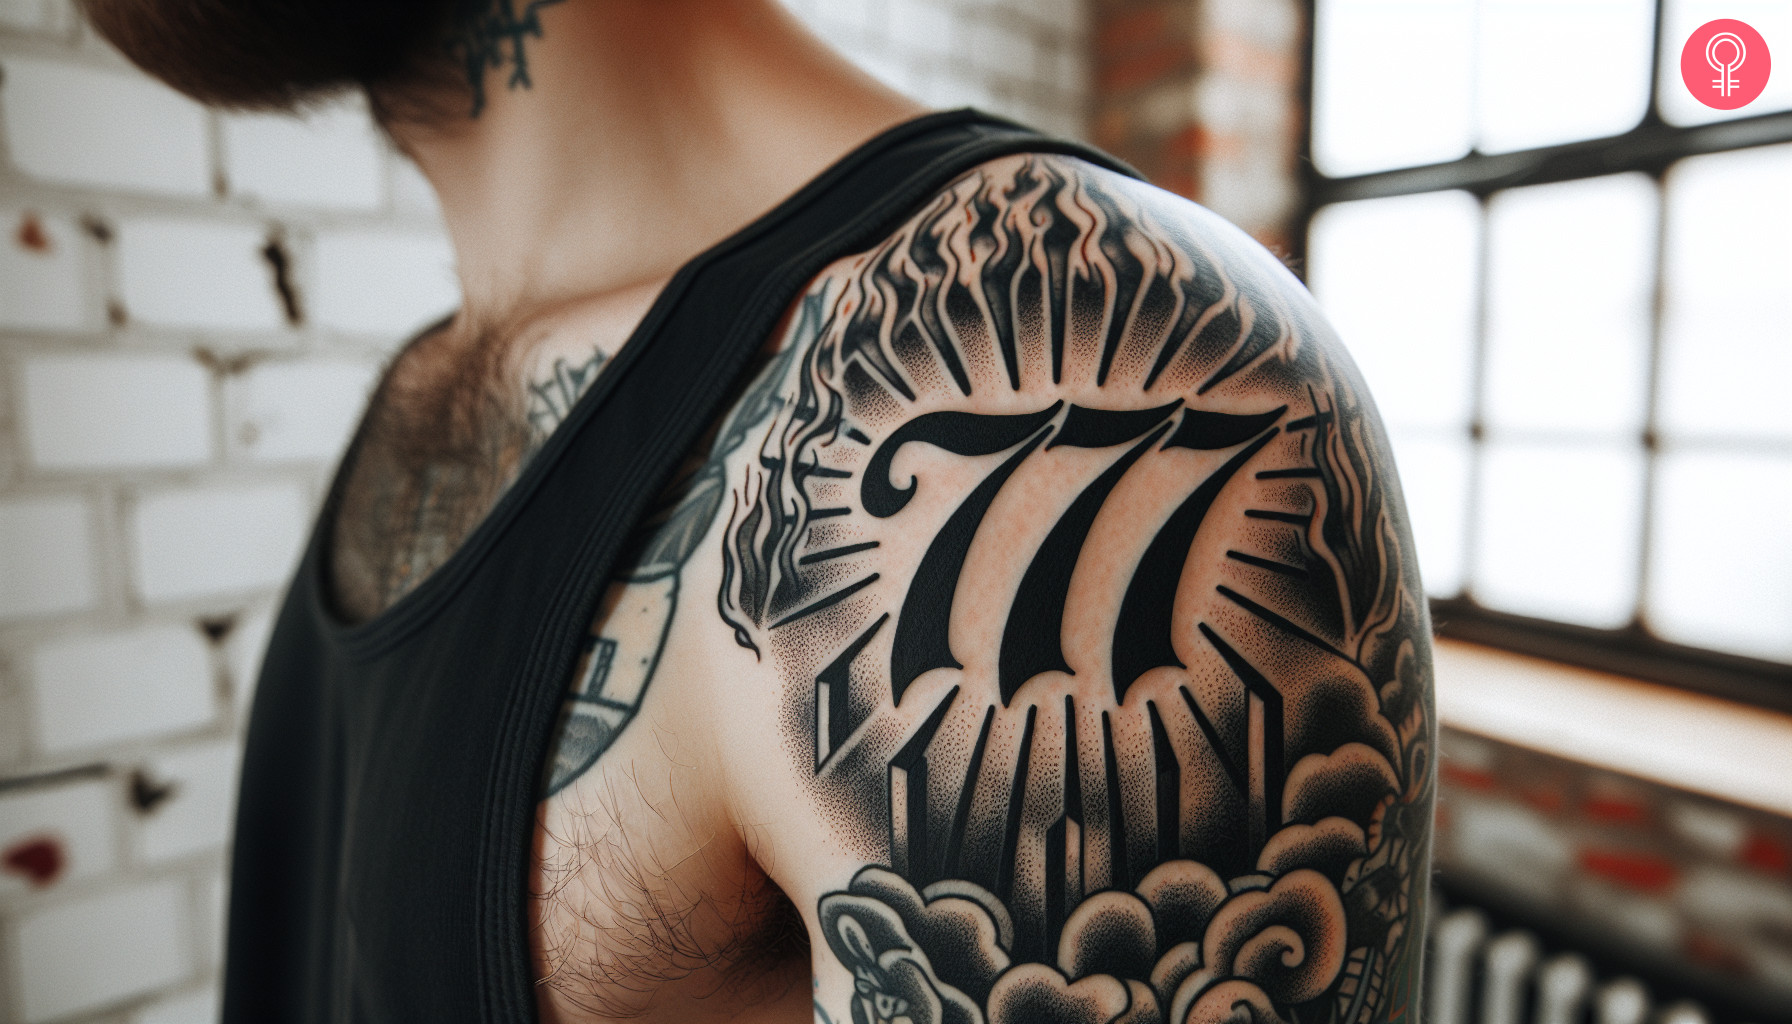 A 777 angel number tattoo on the shoulder of a man